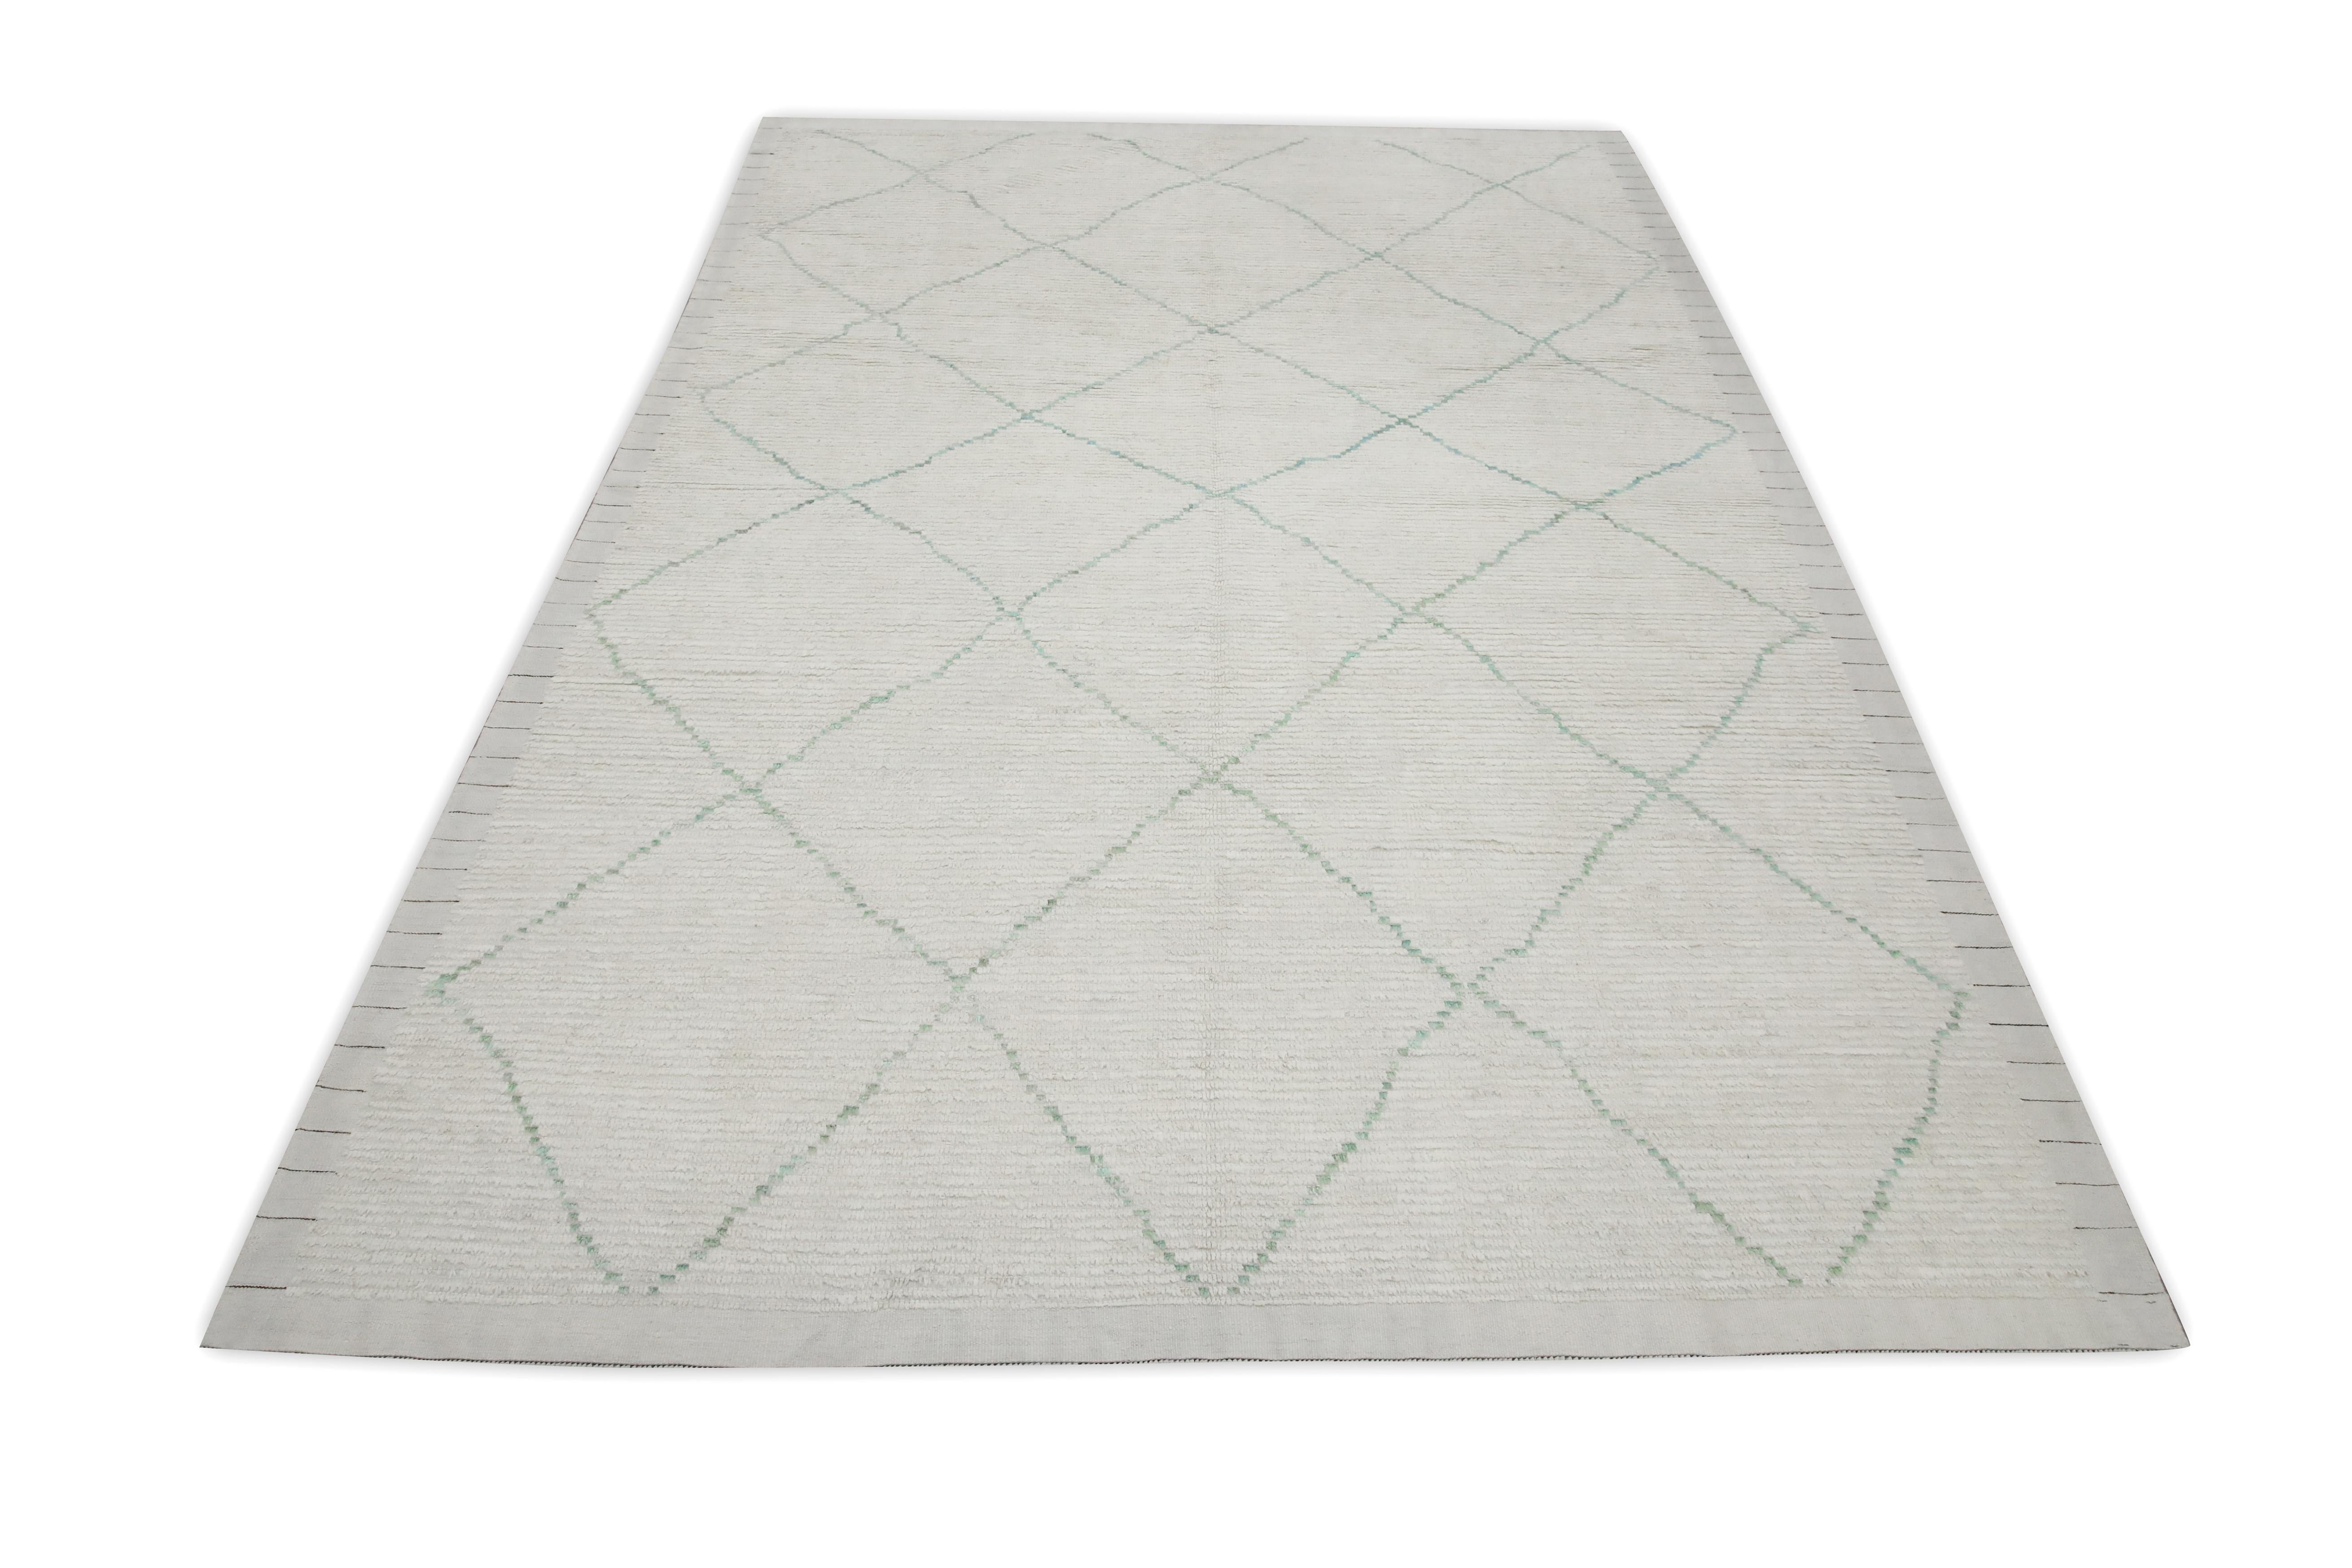 Contemporary White 21st Century Modern Moroccan Style Wool Rug 7'10